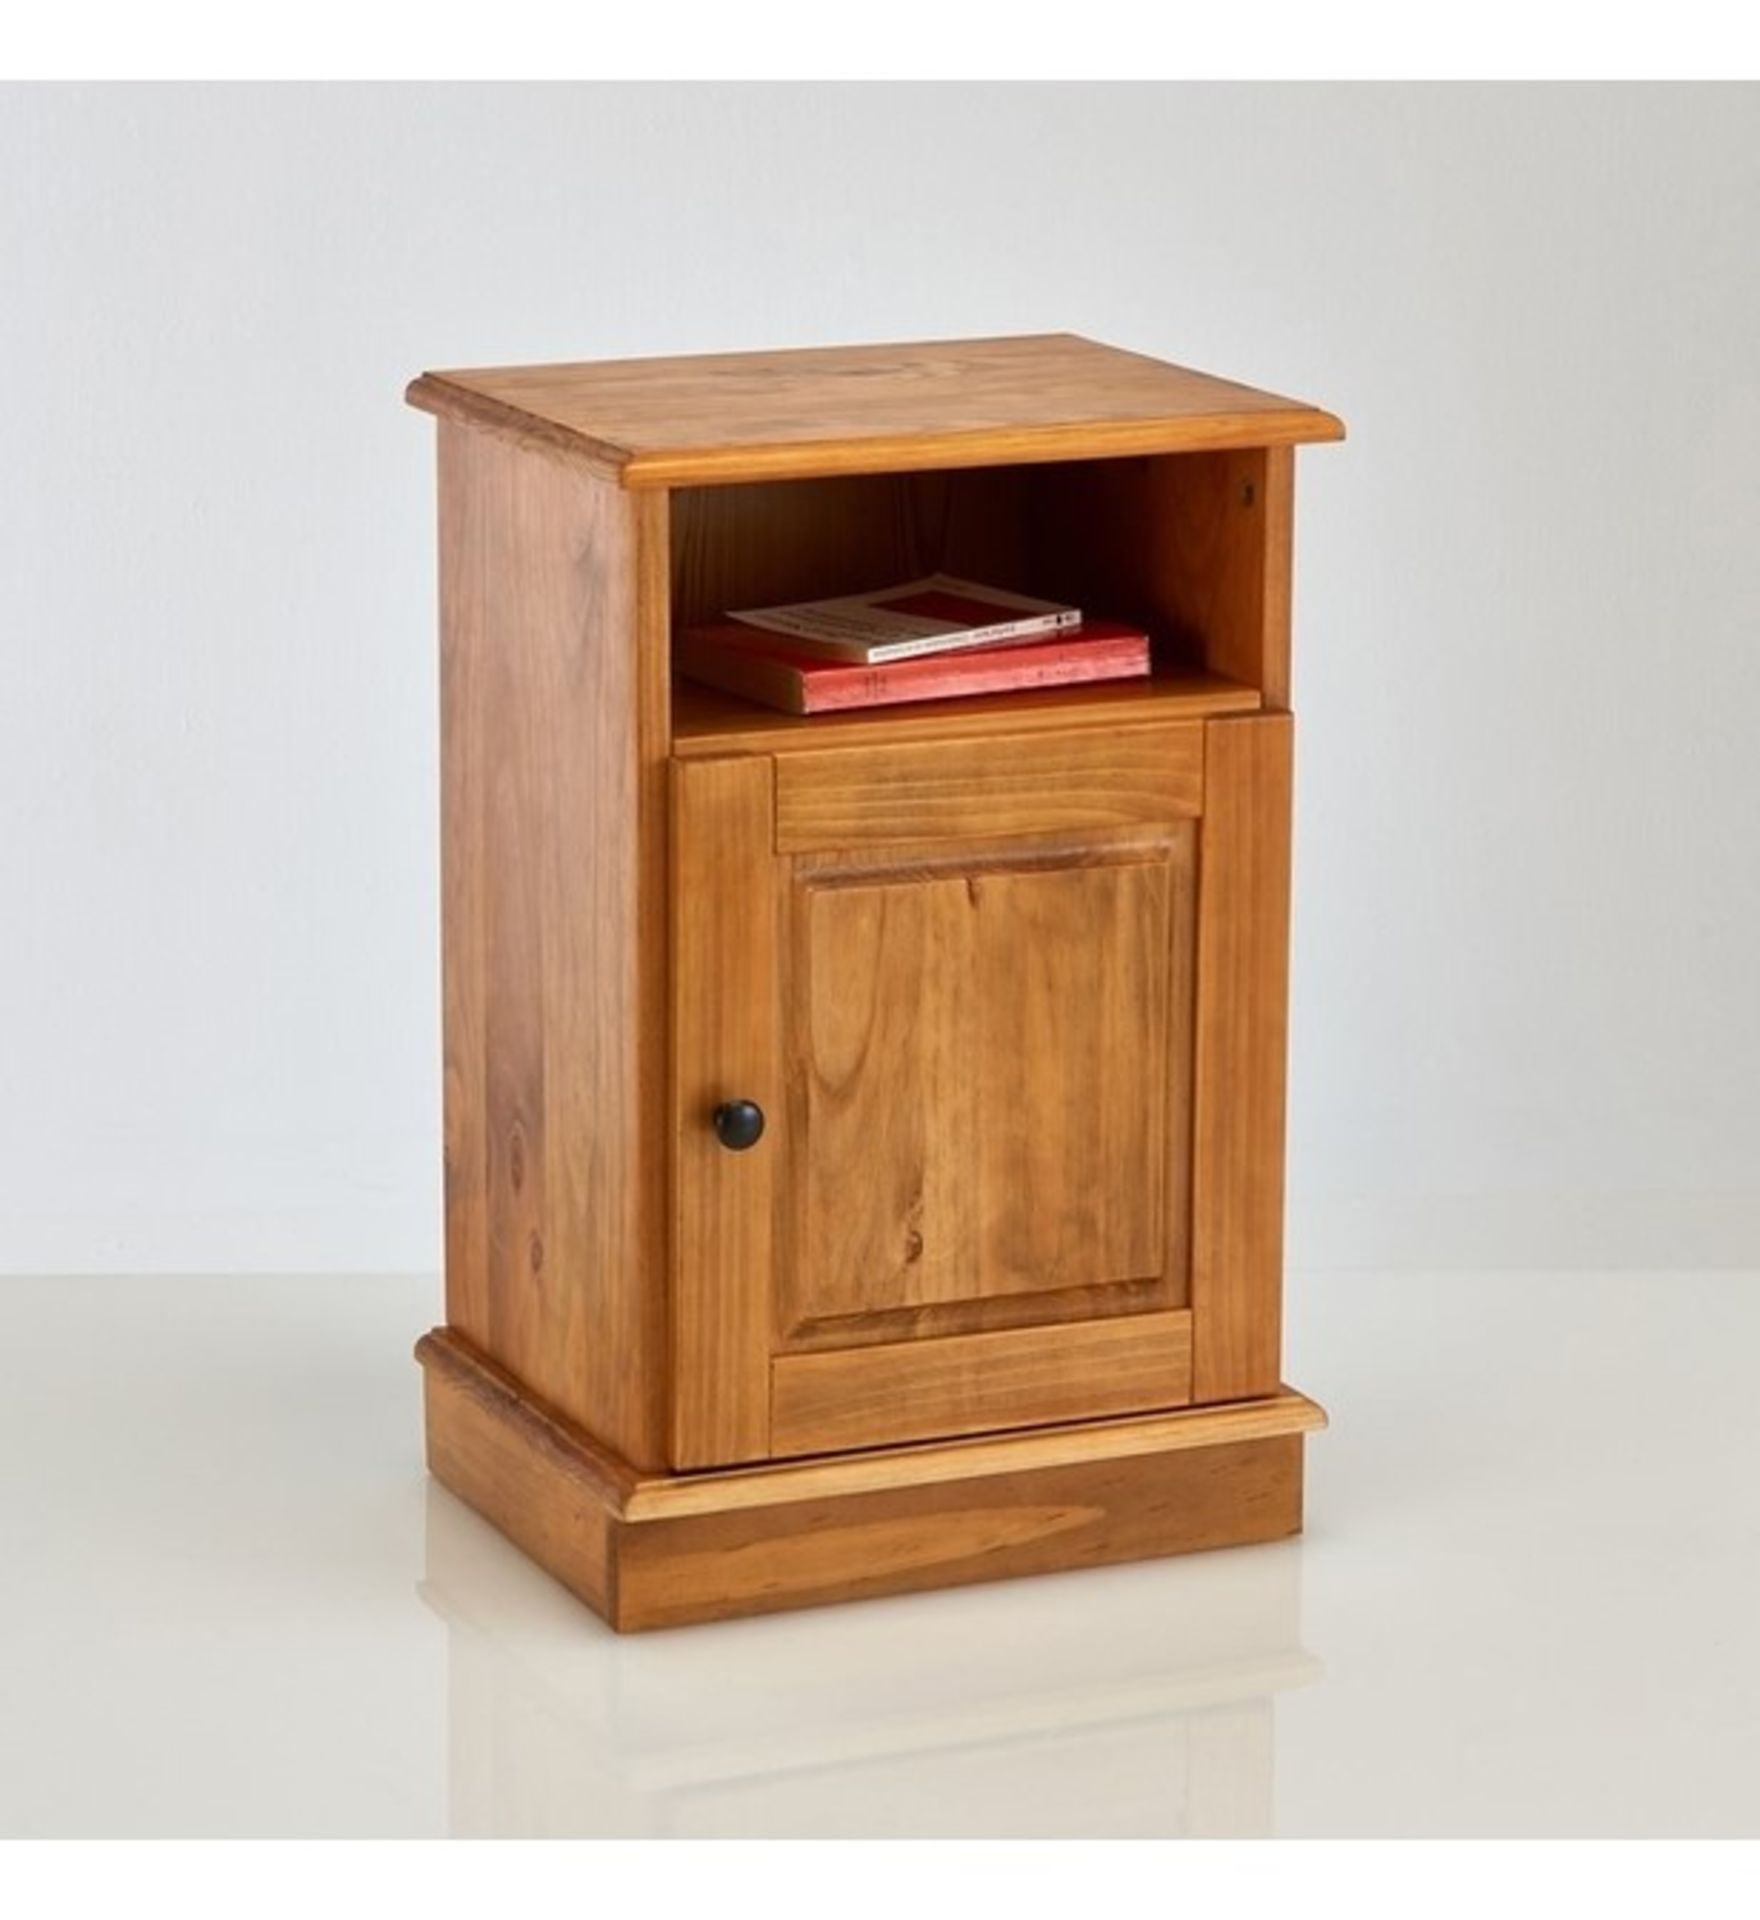 1 GRADE B BOXED DESIGNER AUTHENTIC STYLE WAXED SOLID PINE 1 DOOR BEDSIDE TABLE / RRP £140.00 (PUBLIC